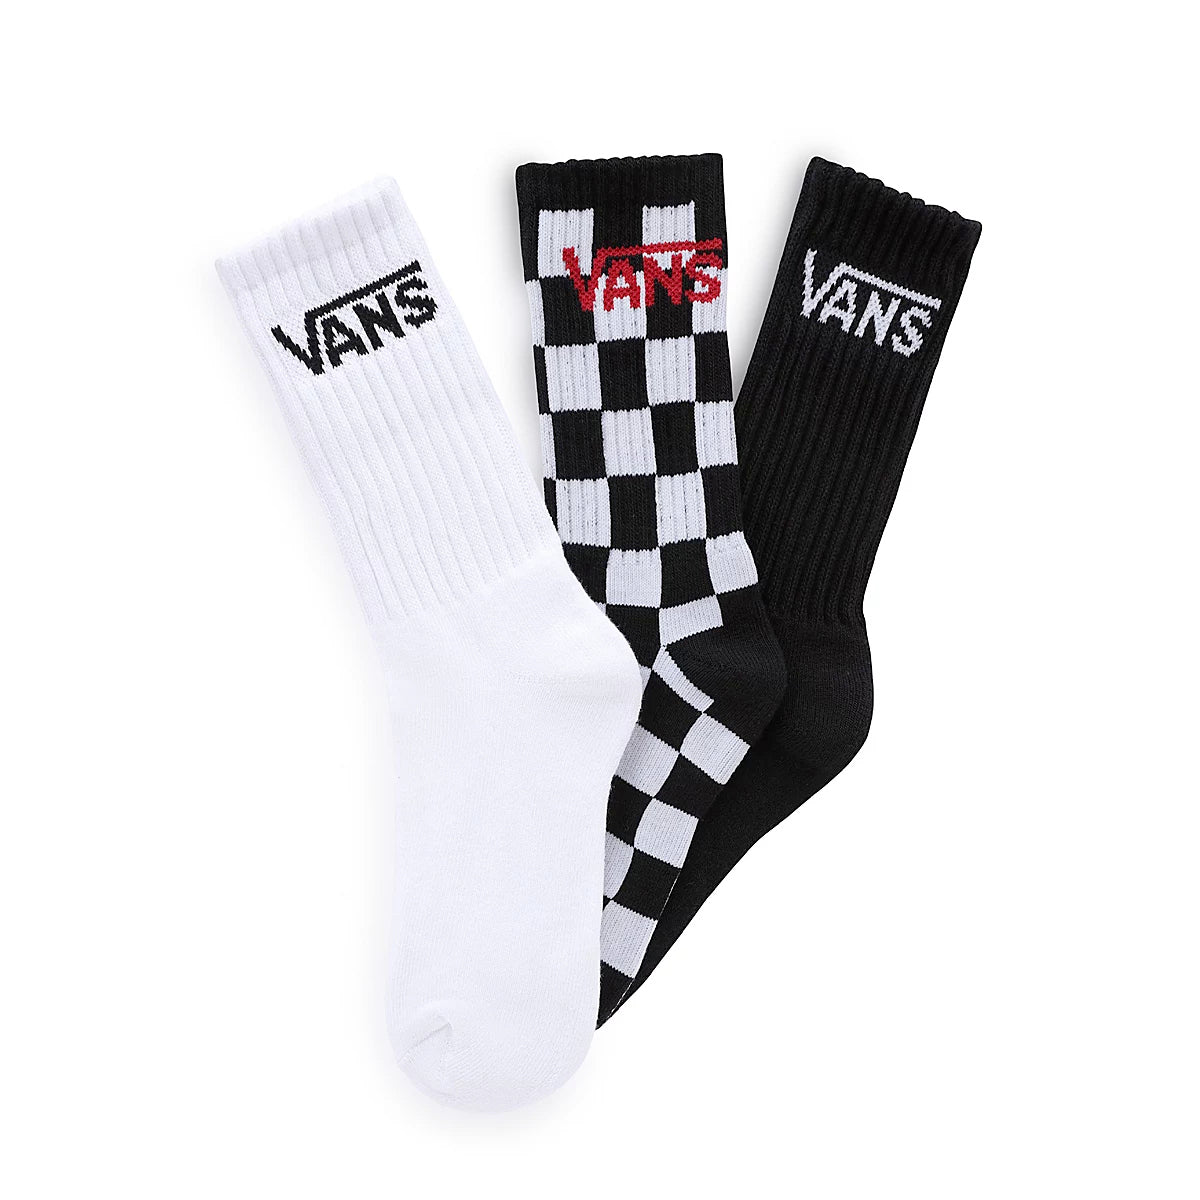 BY CLASSIC CREW YOUTH (10-13.5, 3PK) BLACK CHECKERBOARD